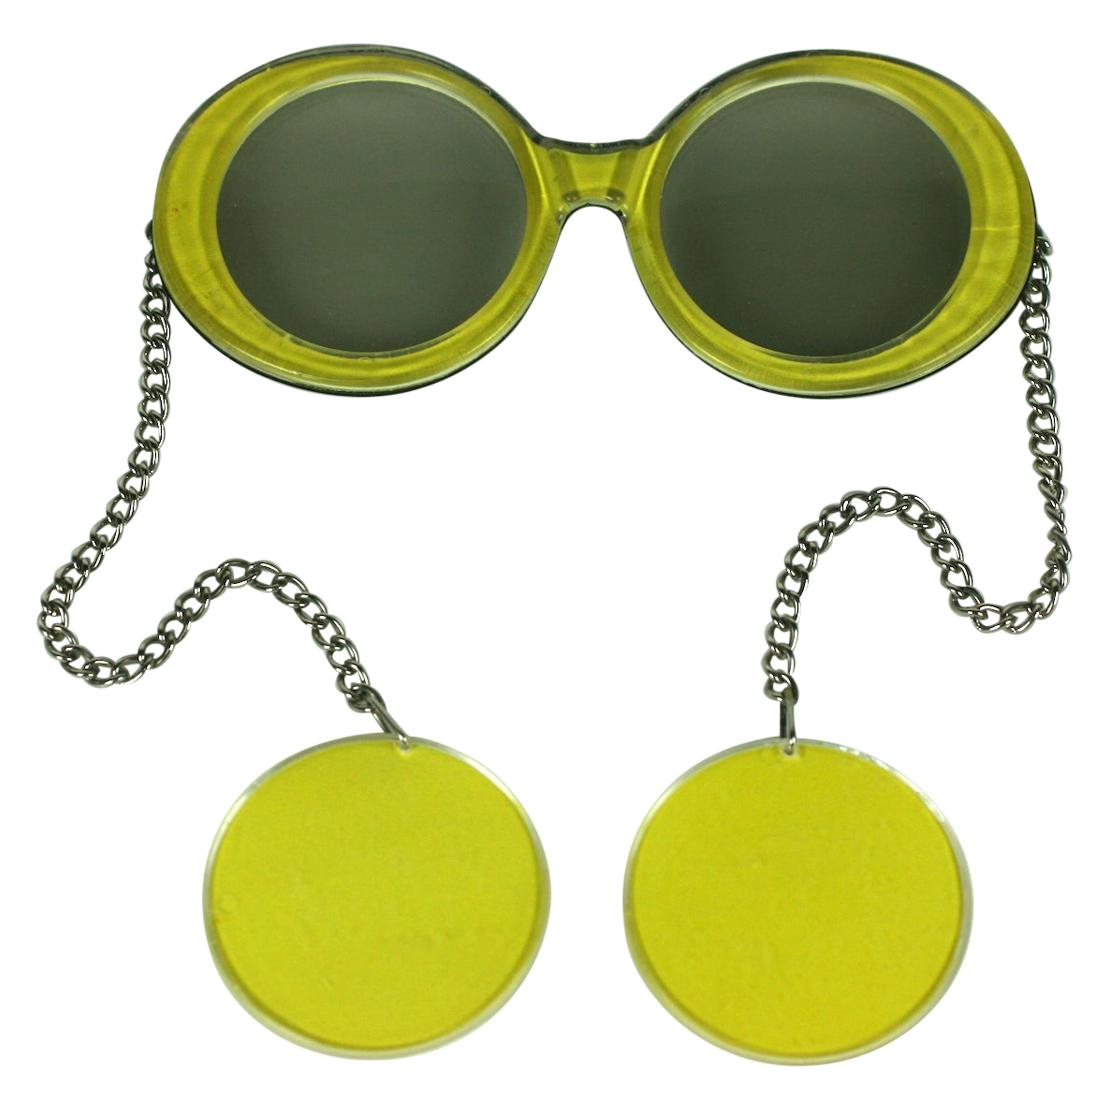 Mod Glasses and Earrings Combo For Sale